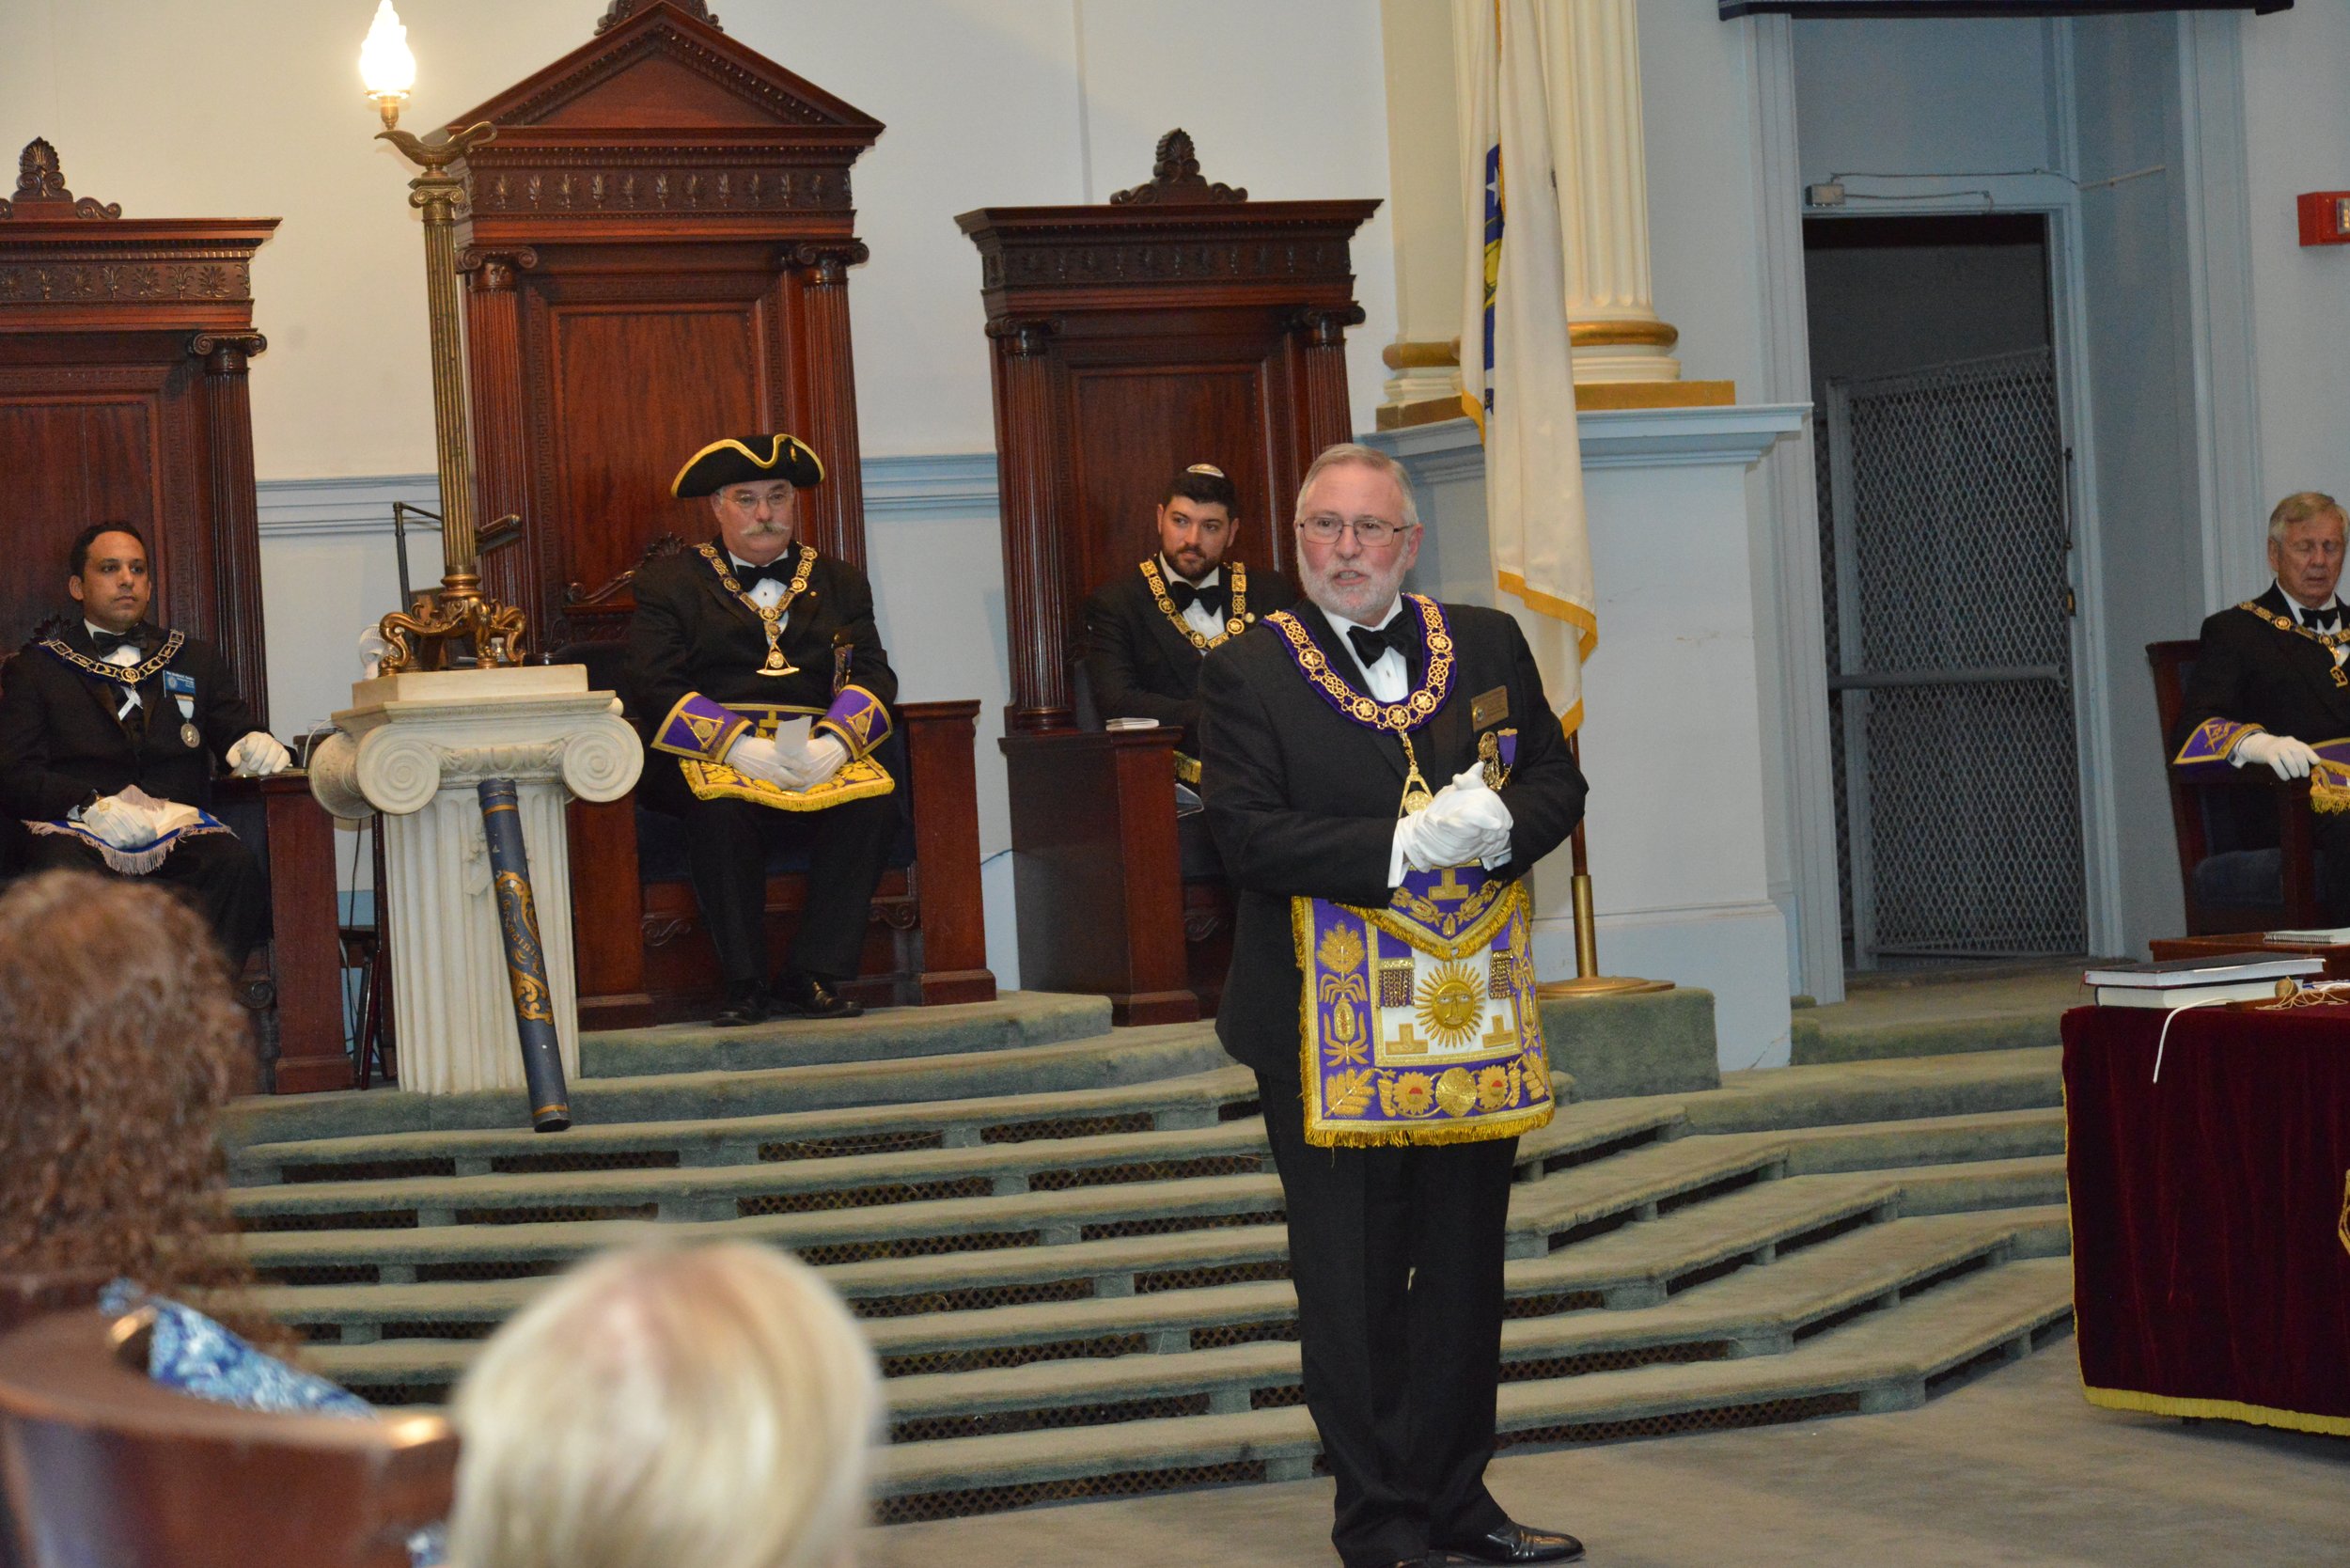  Remarks by the Grand Secretary, Most Worshipful Richard Maggio 